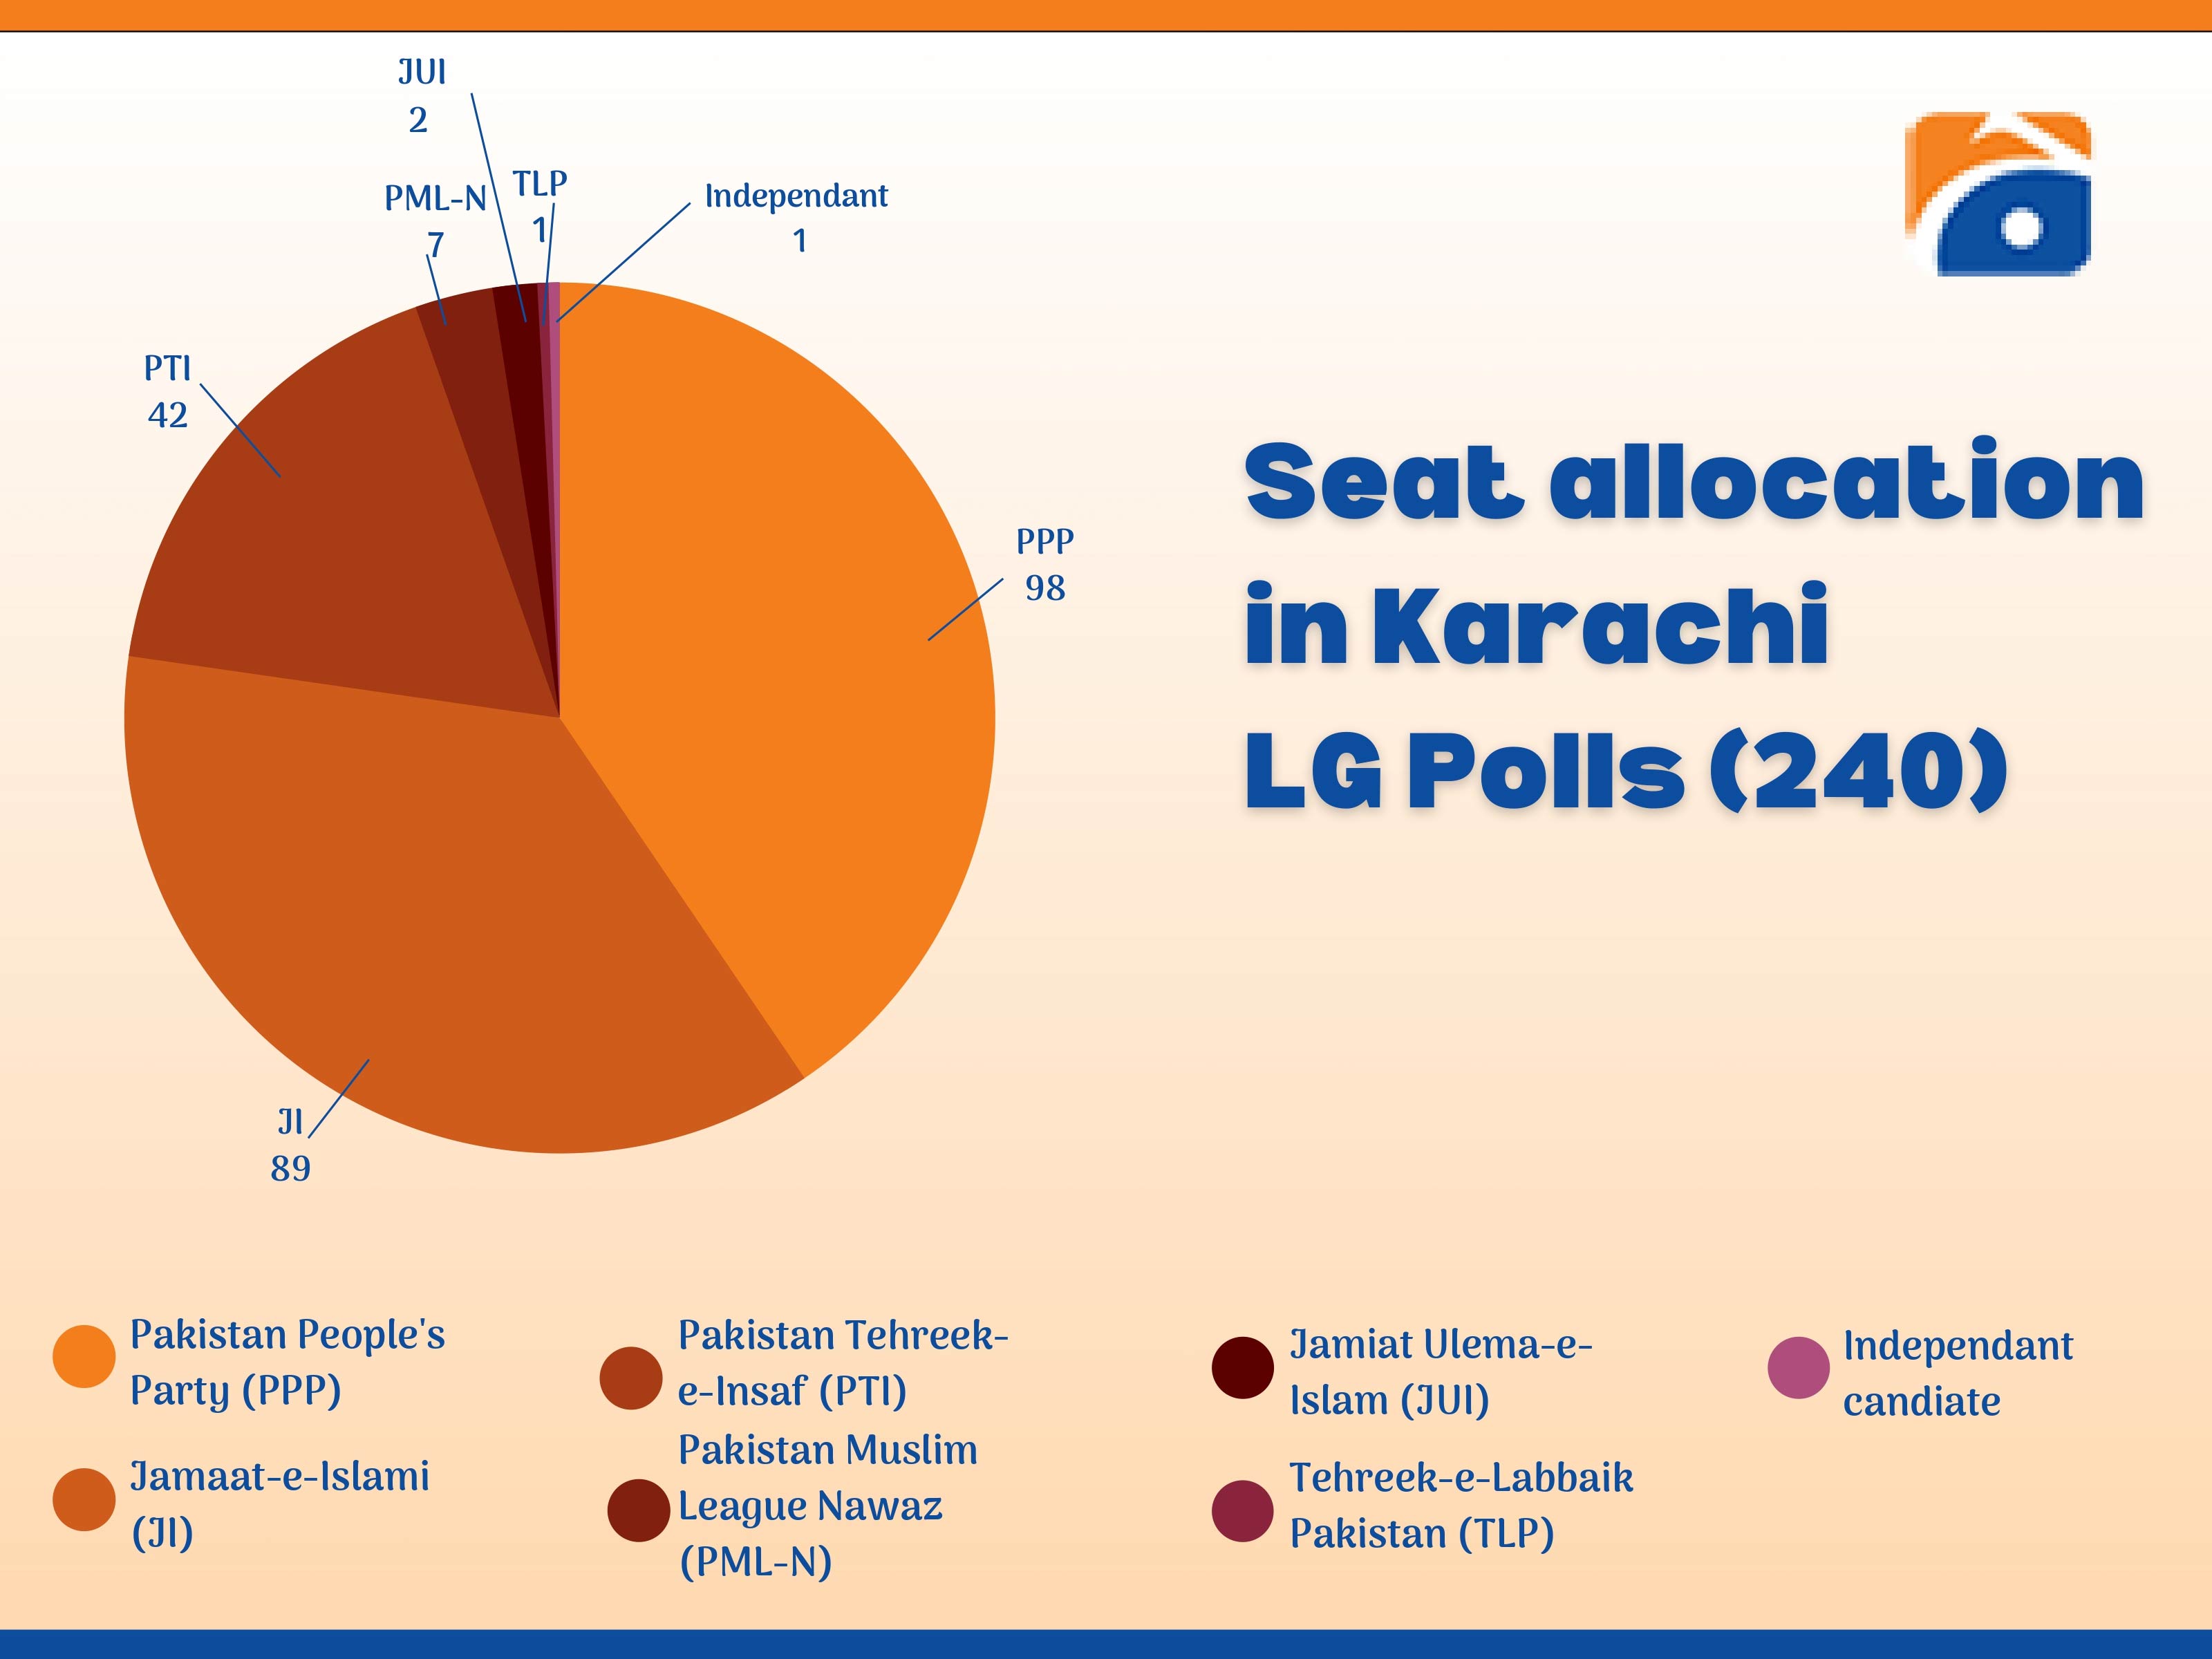 Karachi LG polls: Which political party will future Karachi mayor be from?